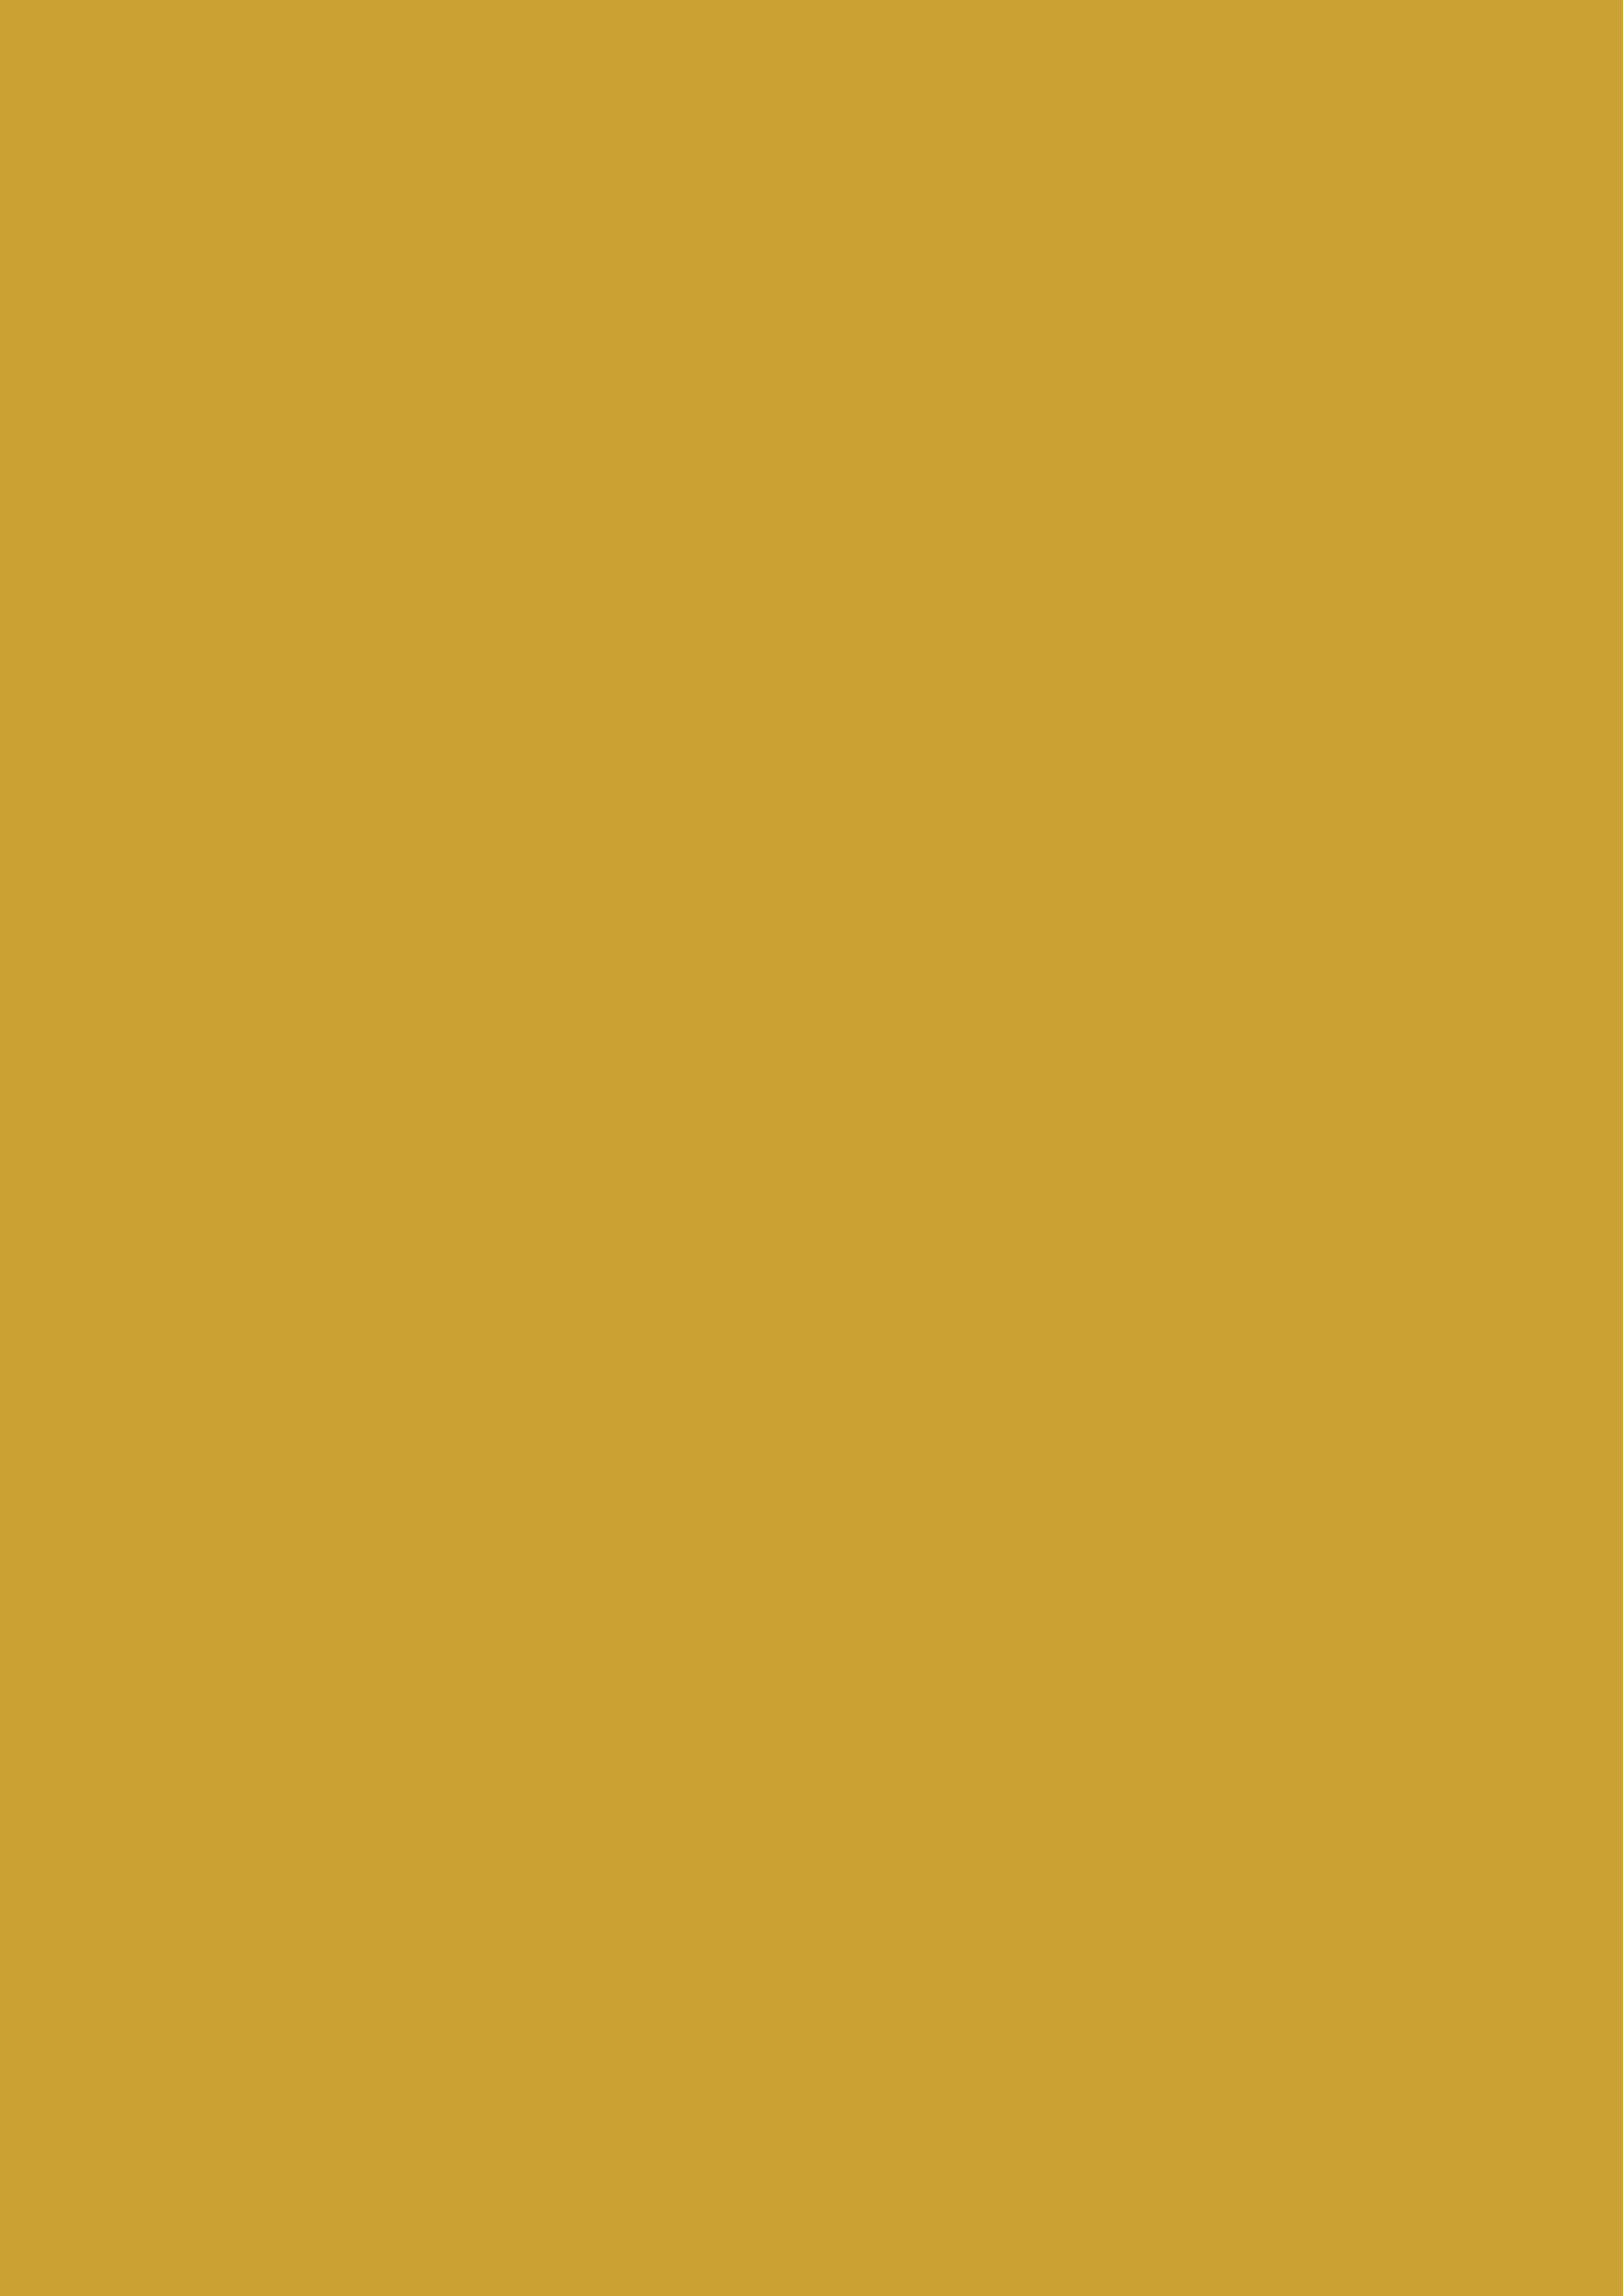 2480x3508 Satin Sheen Gold Solid Color Background